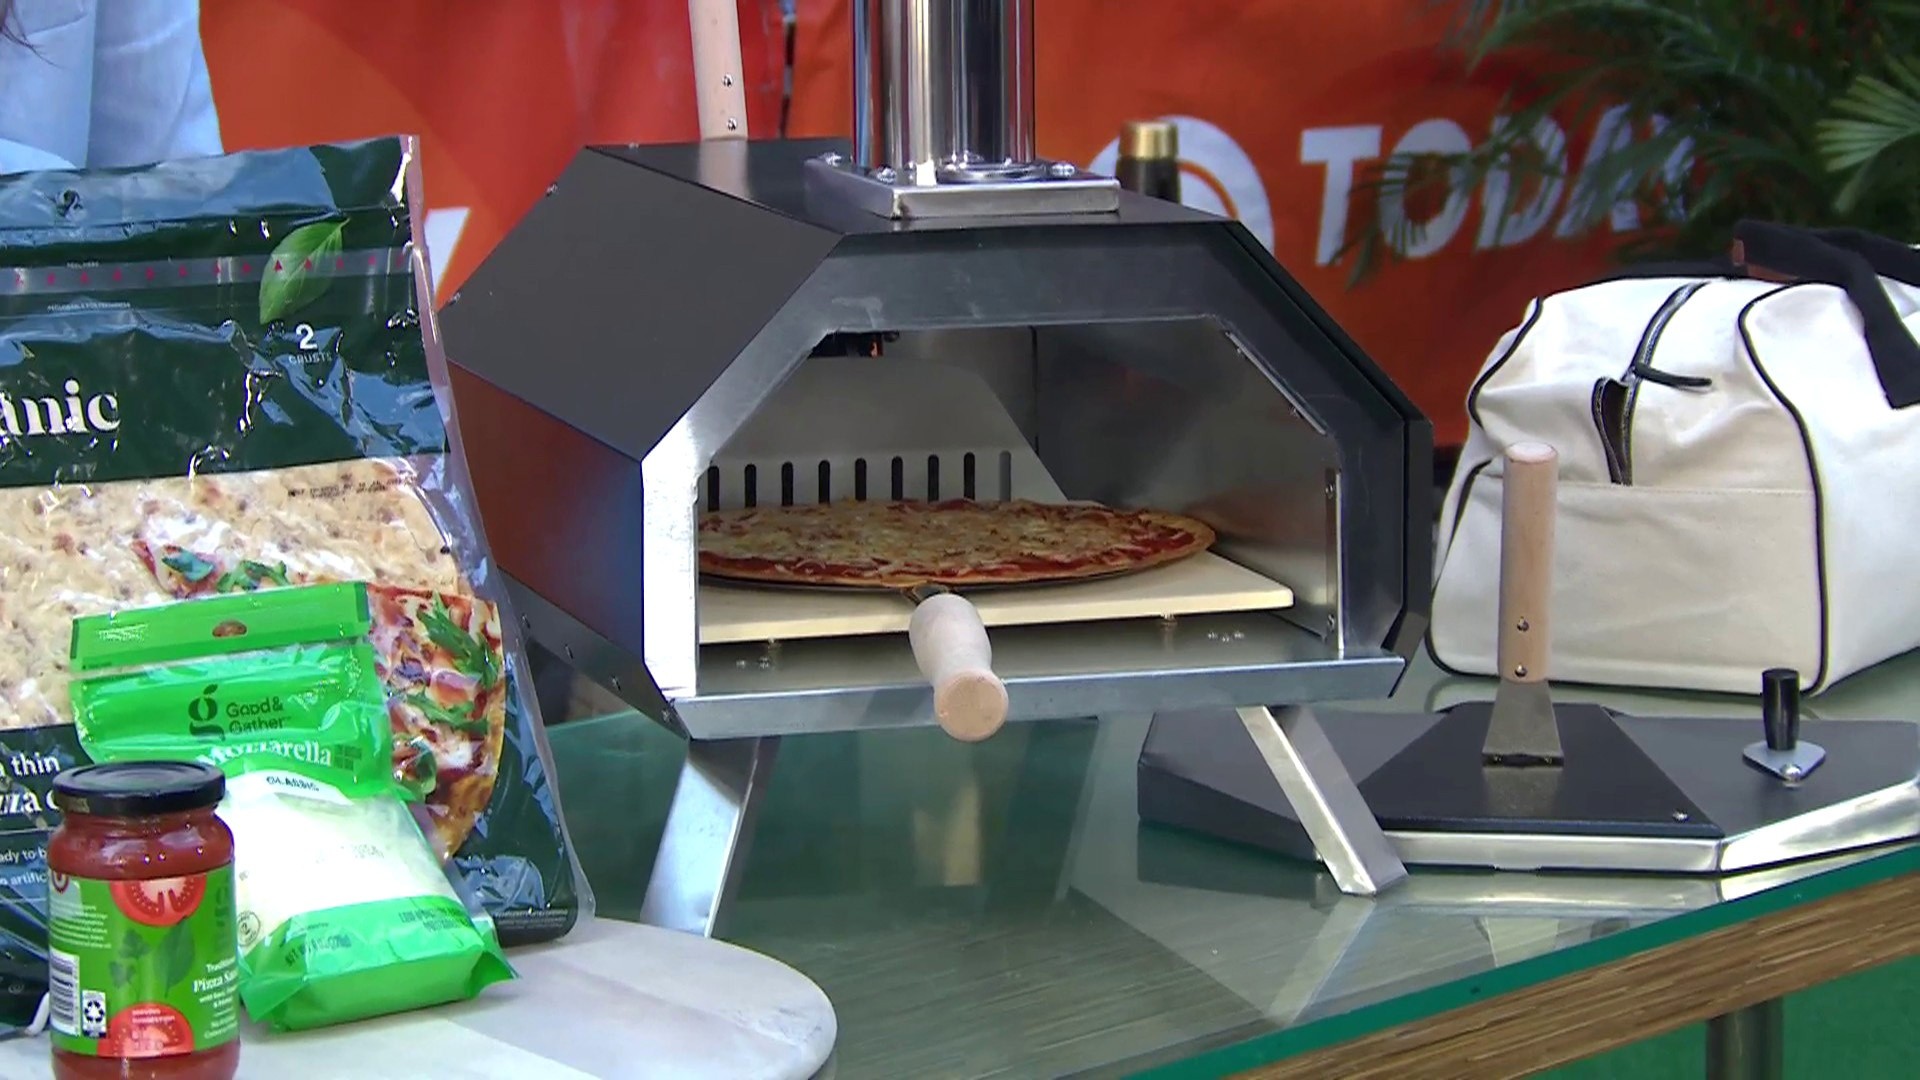 iTWire - Give yourself a backyard digital detox with the Ooni pizza oven